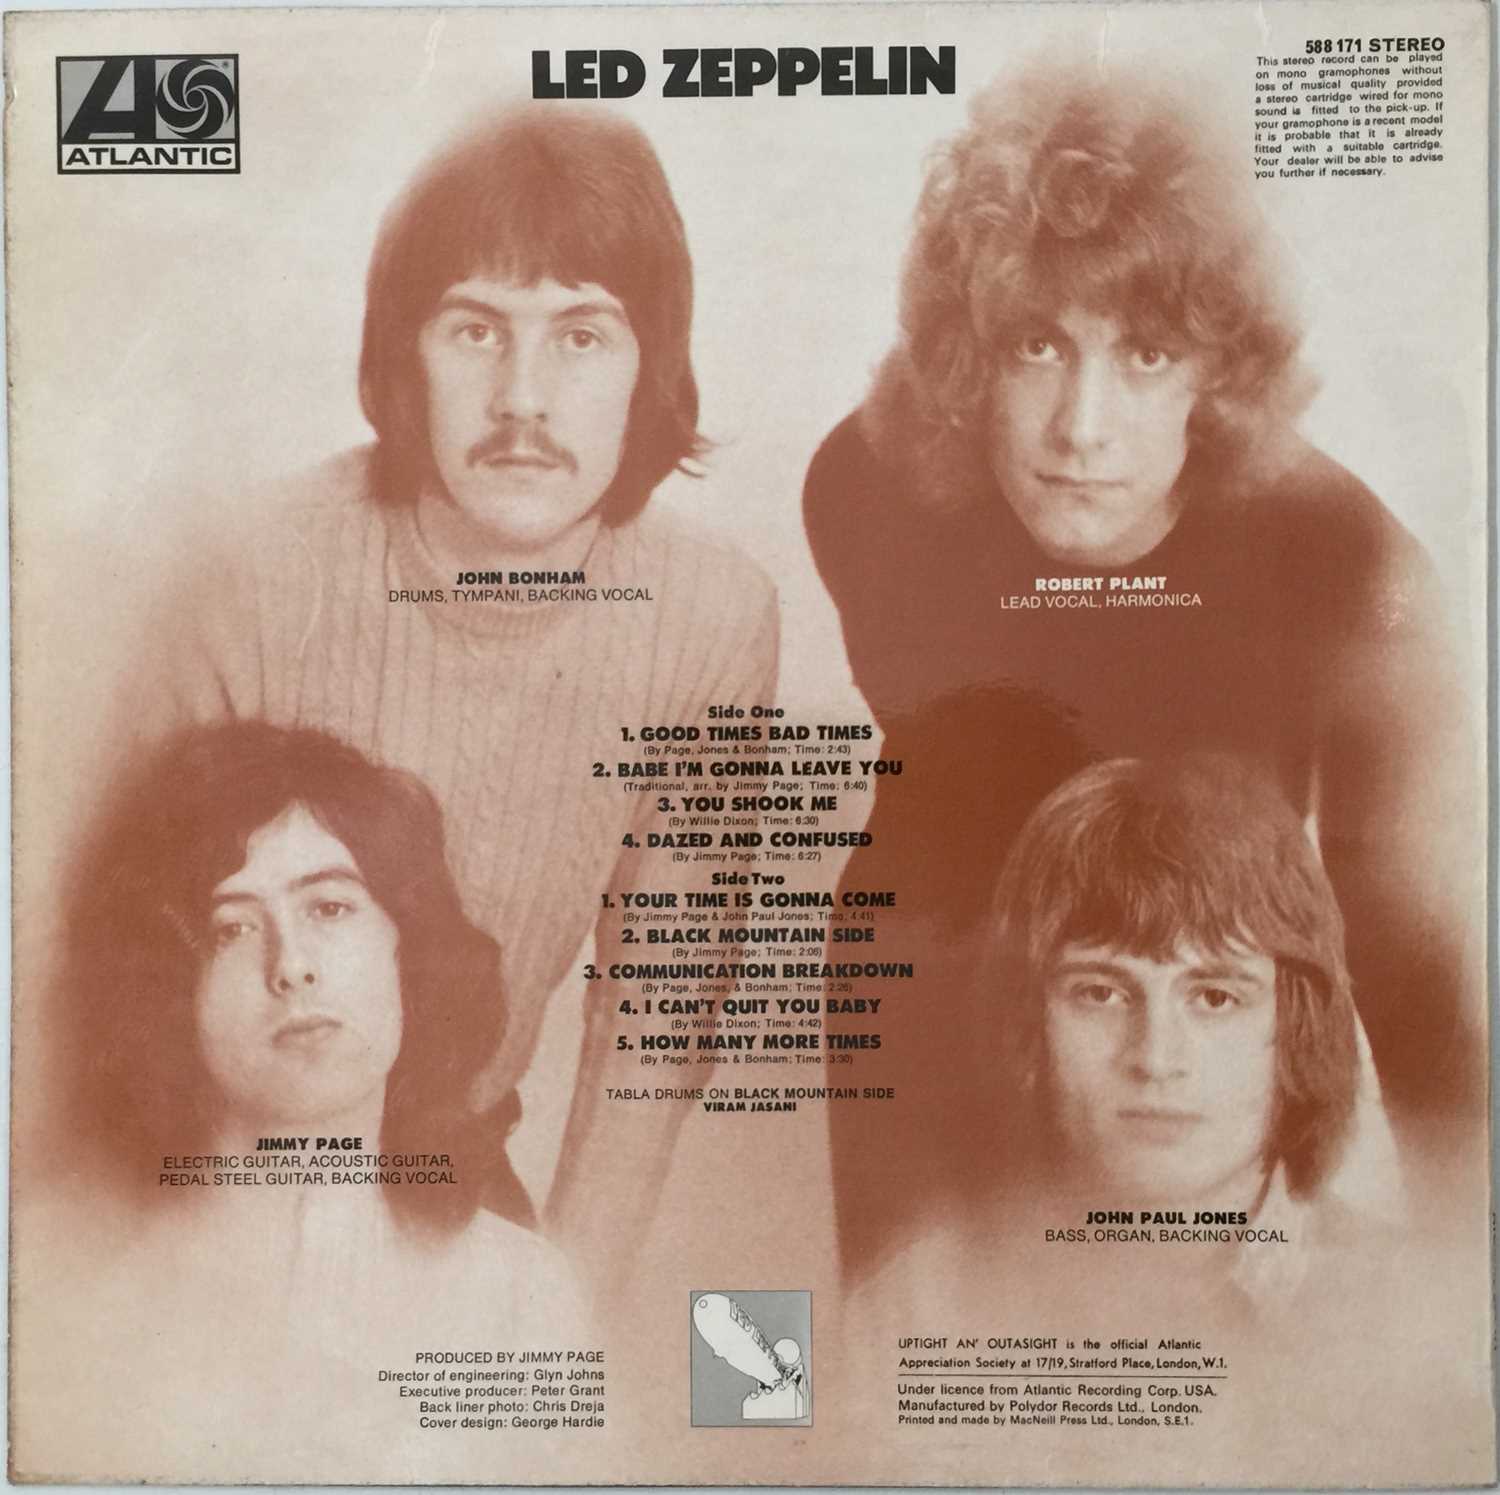 LED ZEPPELIN - 'I' LP (FIRST UK 'TURQUOISE' COPY - ATLANTIC 588171 - UNCORRECTED 8s) - Image 3 of 5